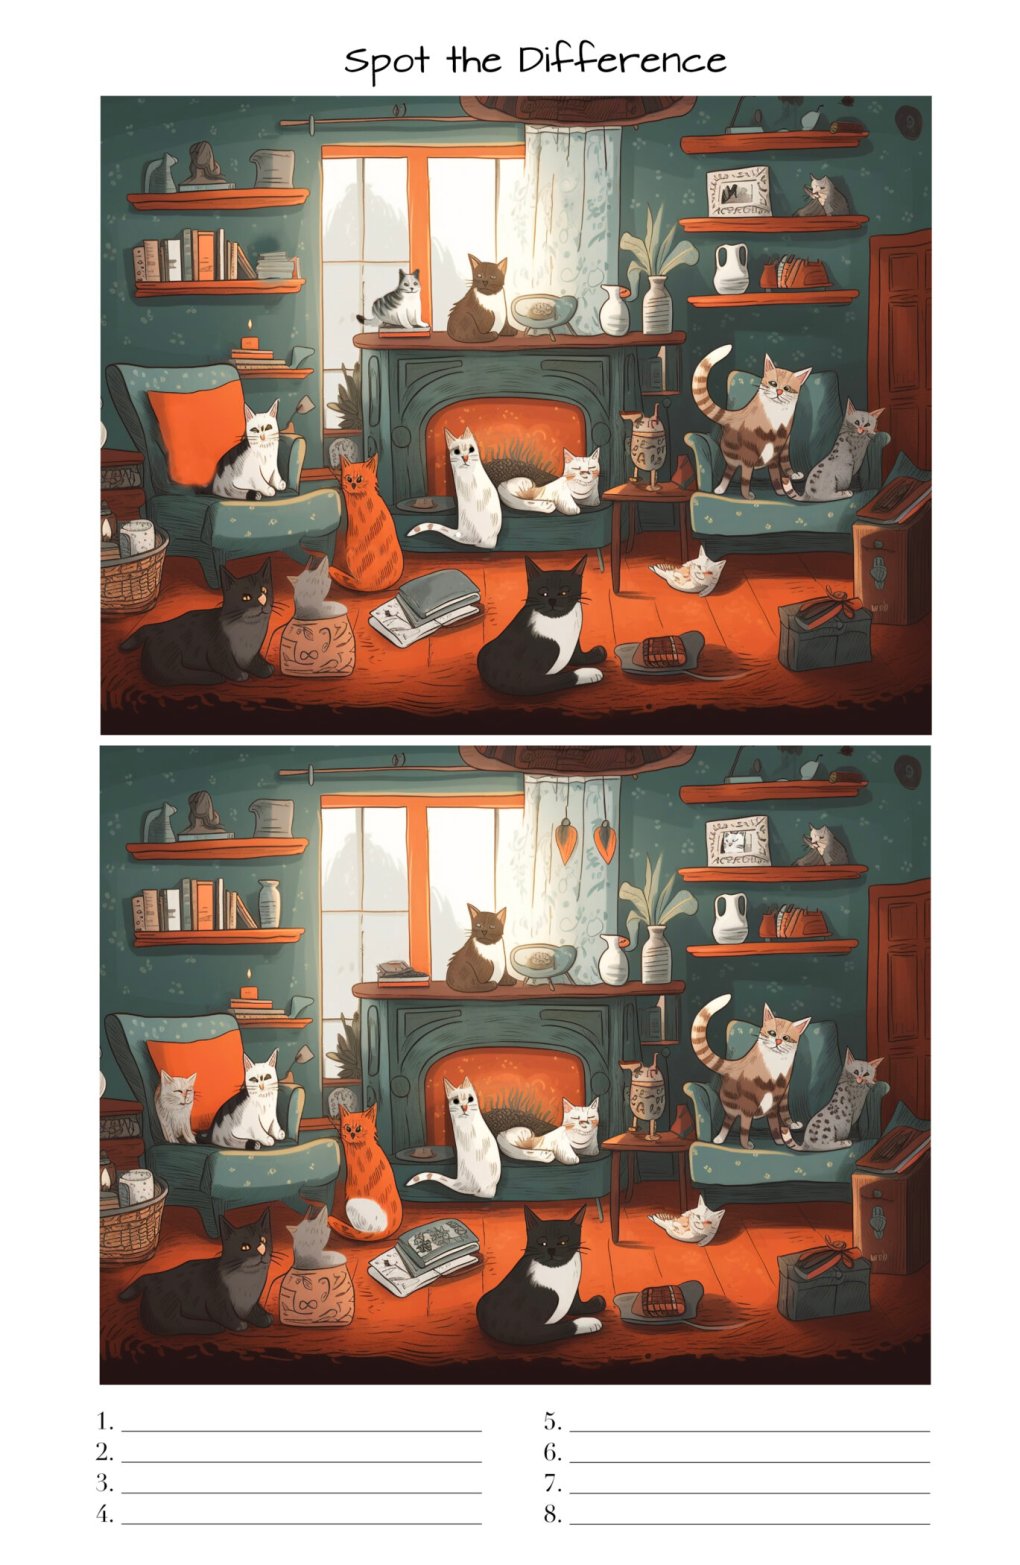 Cat Puzzle Challenge: Can You Spot the Differences in These Two Images?